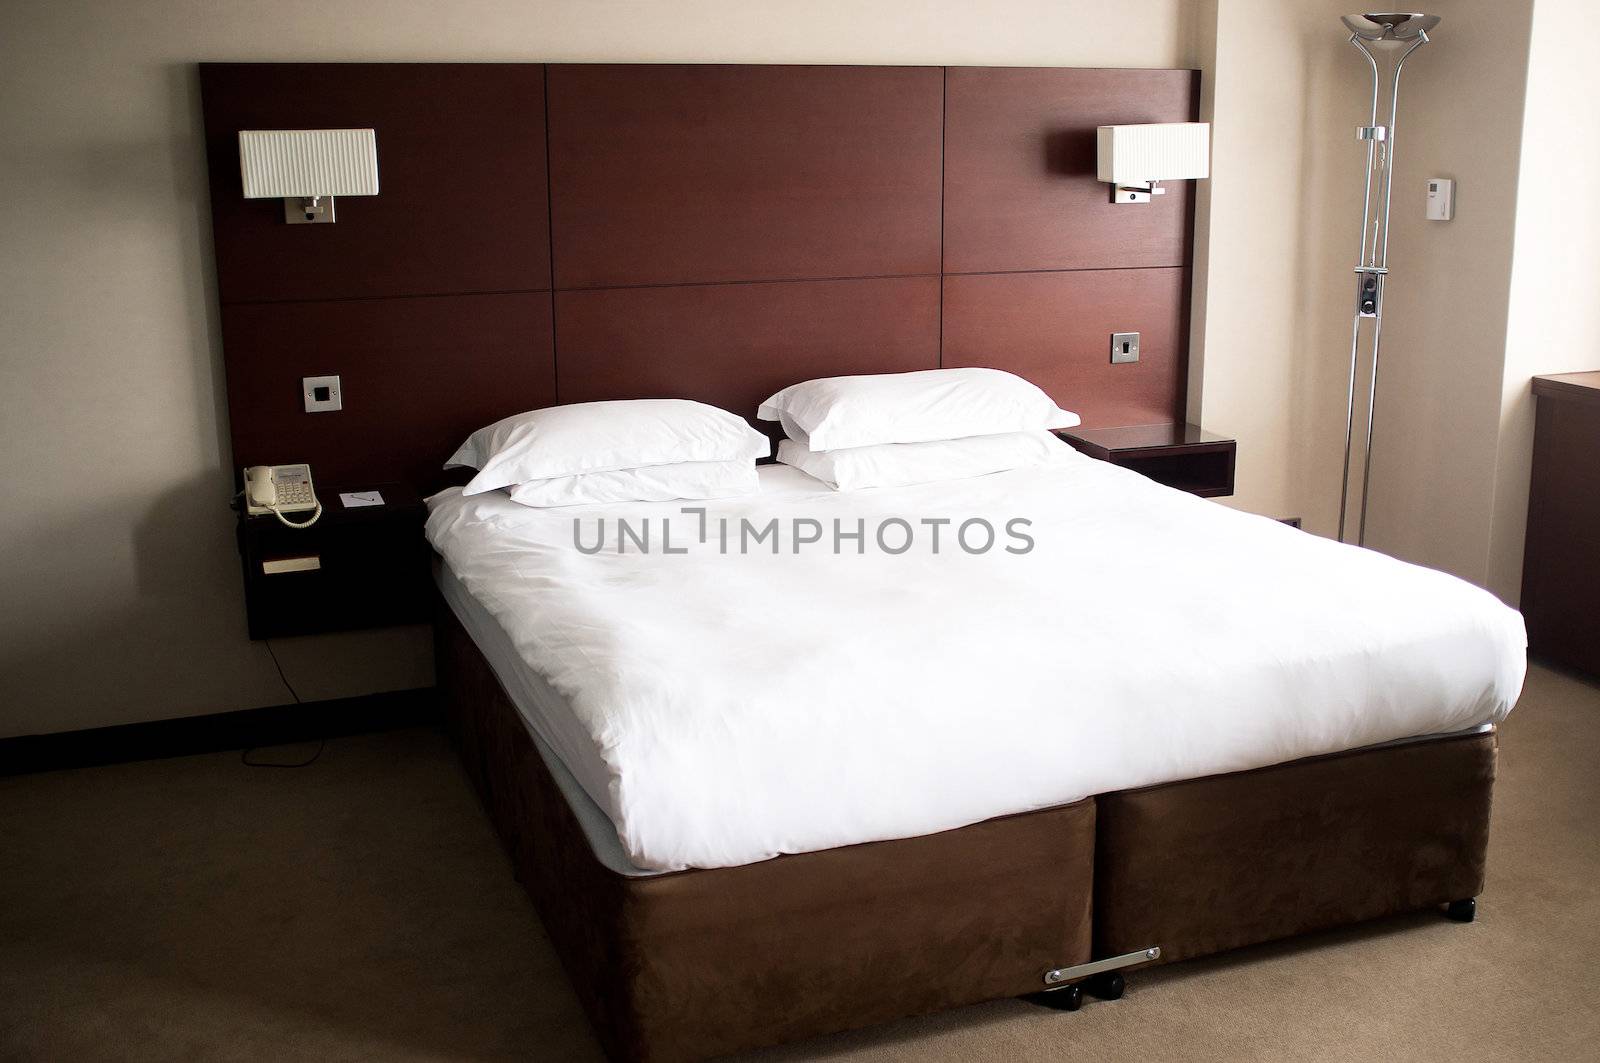 King sized bed in a suite with crisp white sheets on it and a headboard